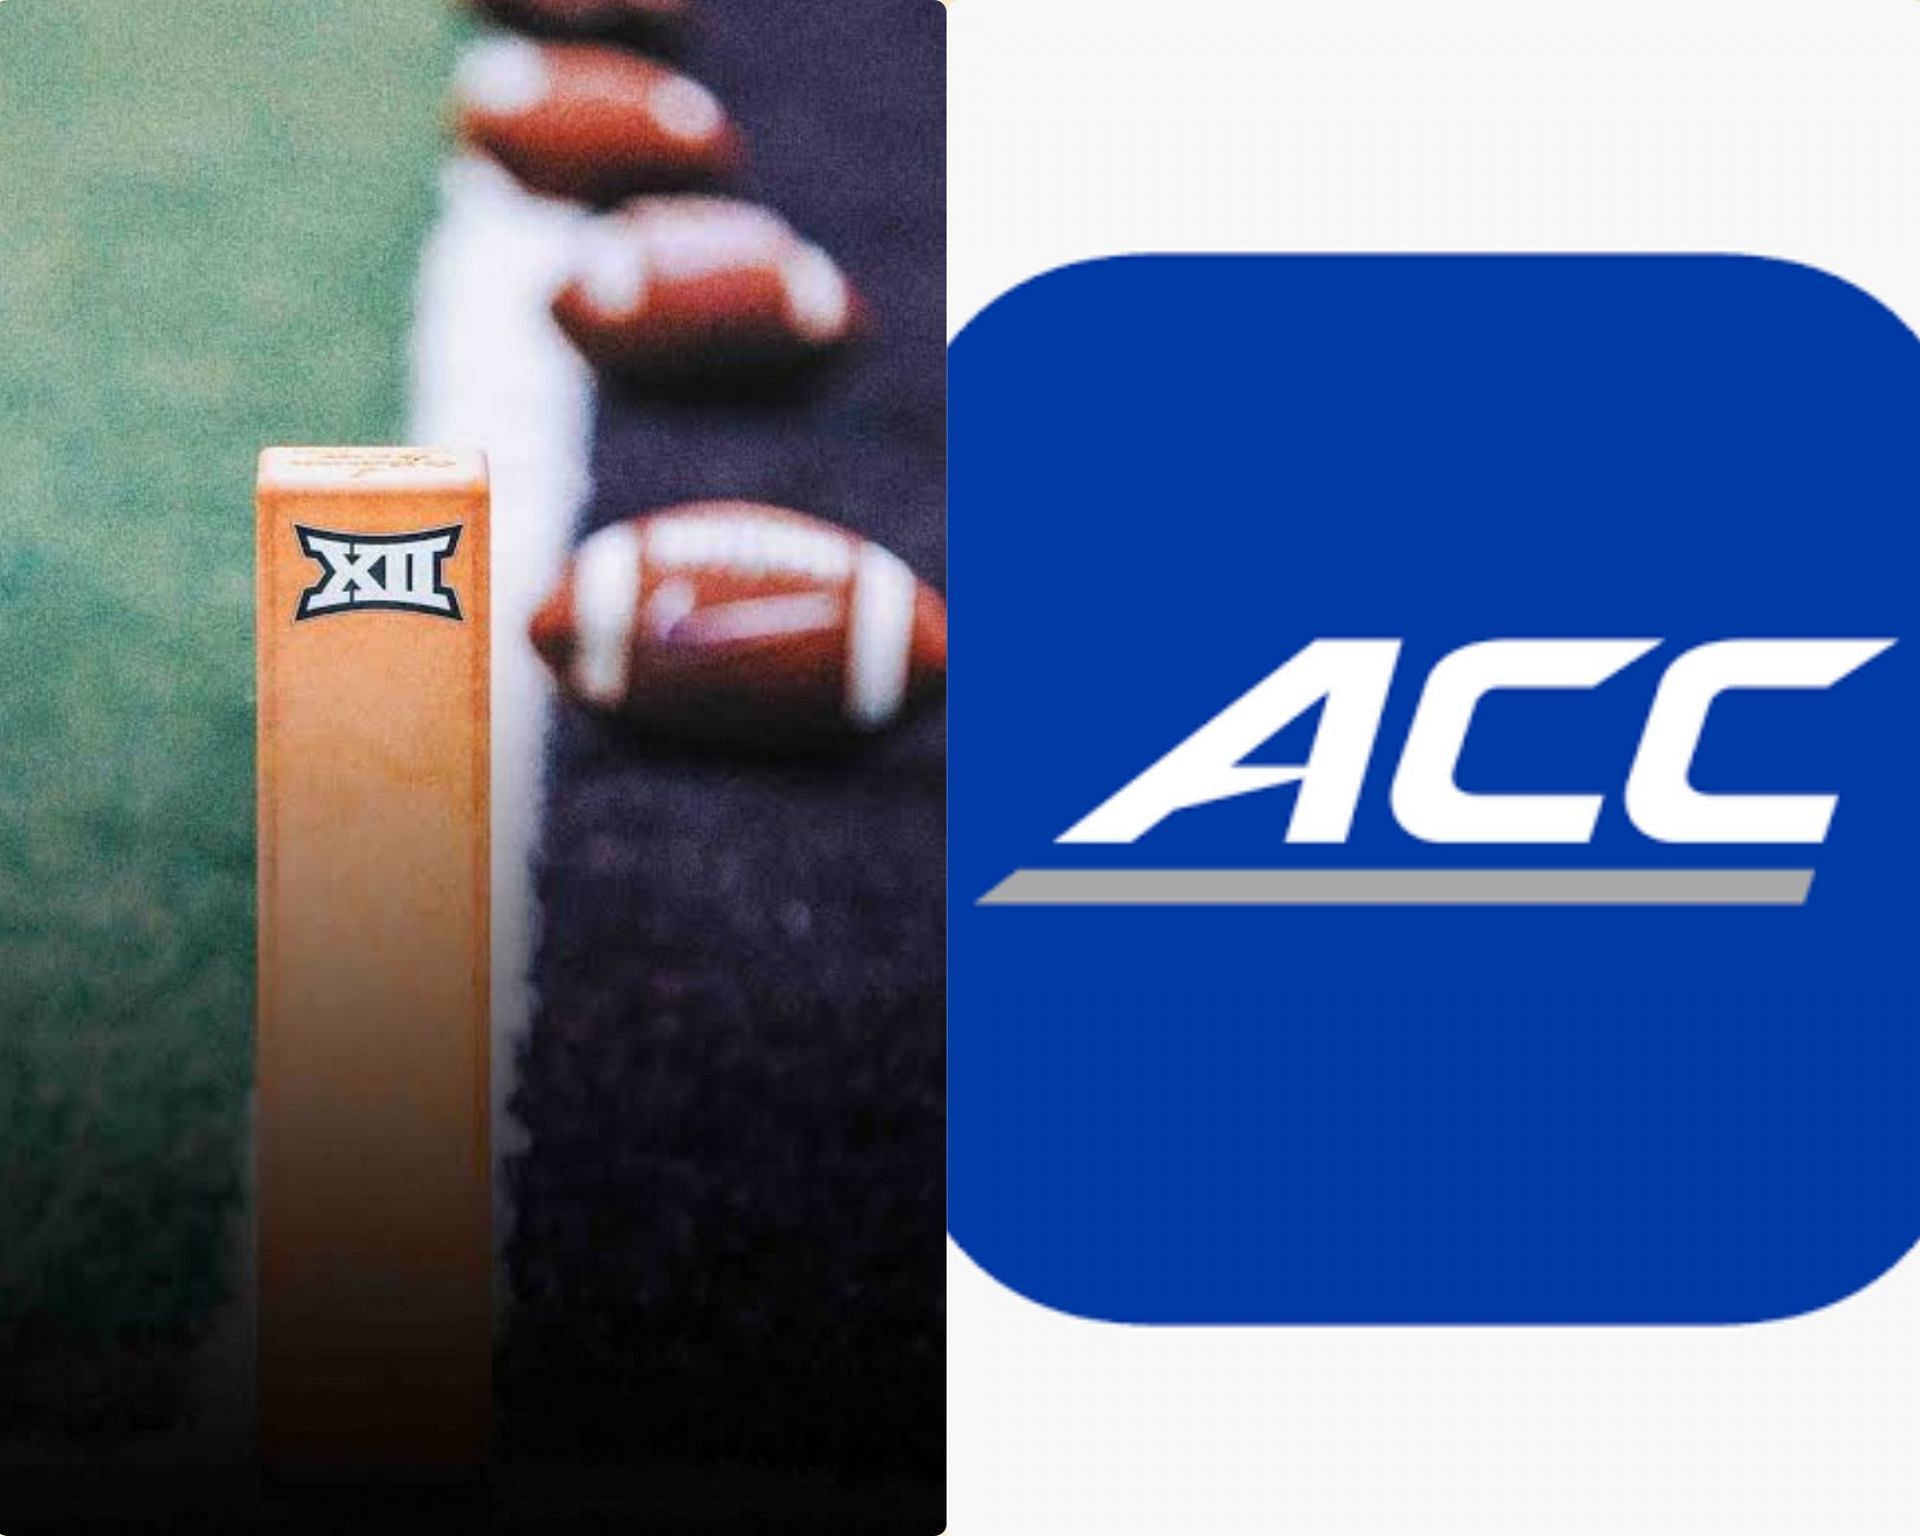 Rumors of a bargain between the Big 12 and the ACC is the latest on conference realignment